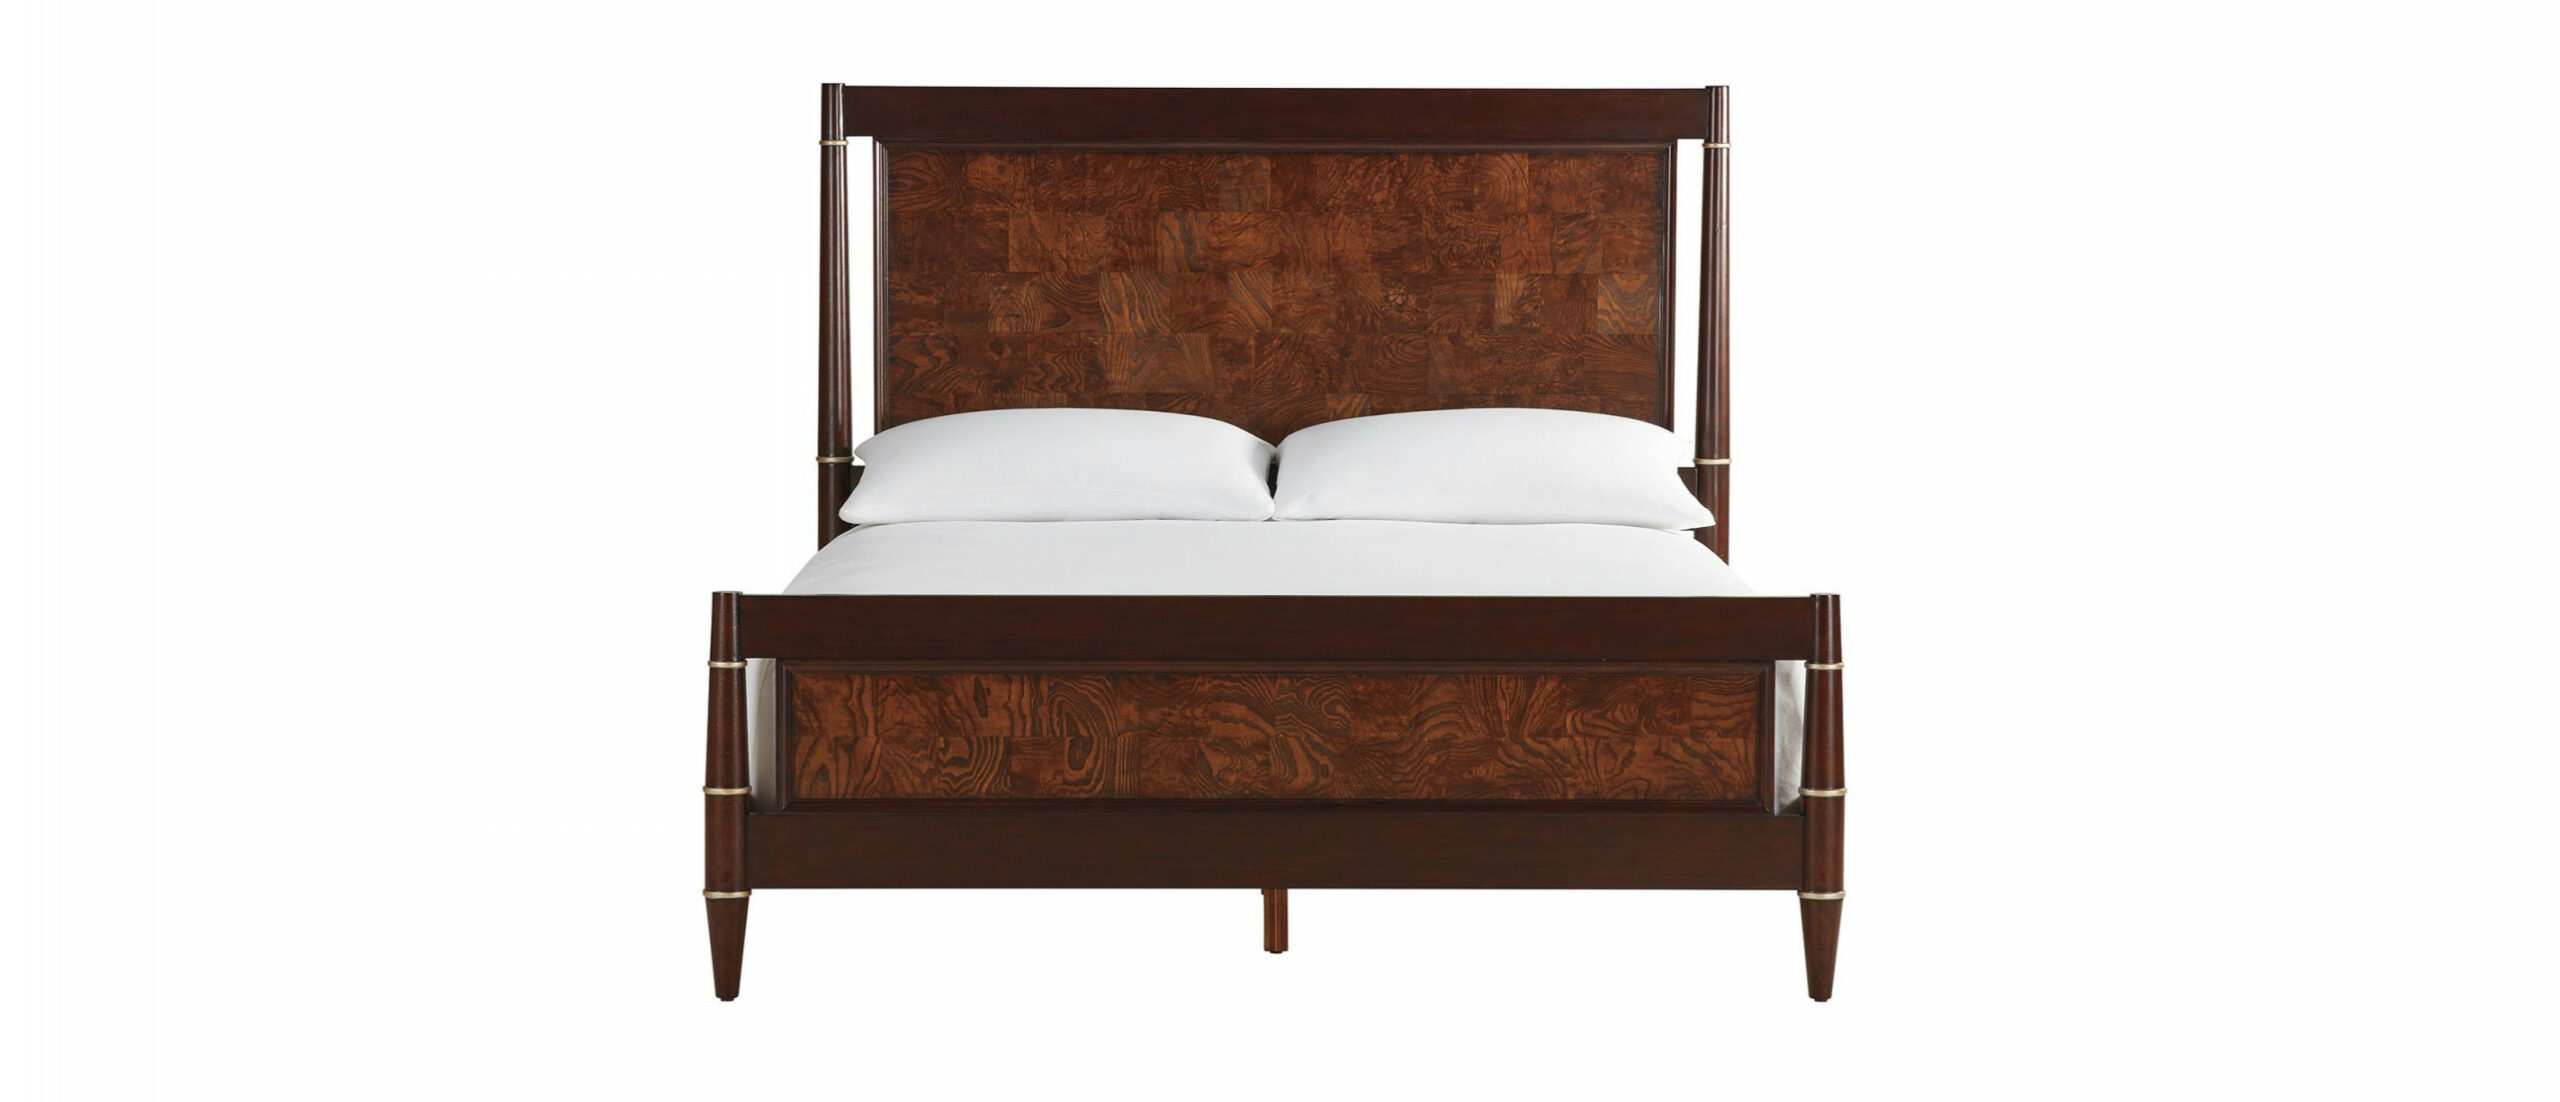 Clement Bed  Solid Wood Bed  Ethan Allen